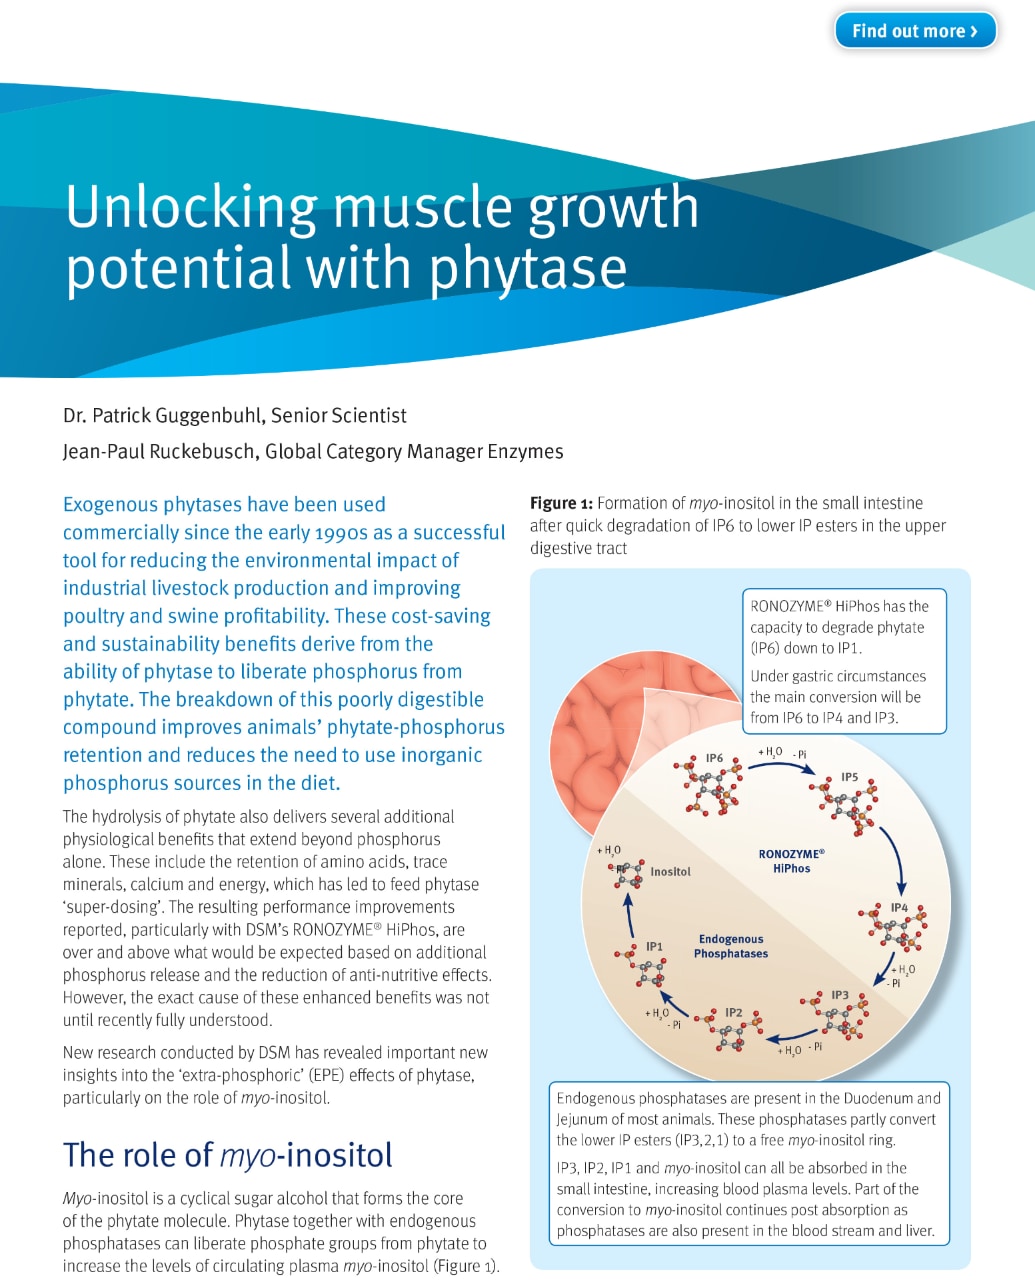 Unlocking Muscle Growth Potential With Phytase